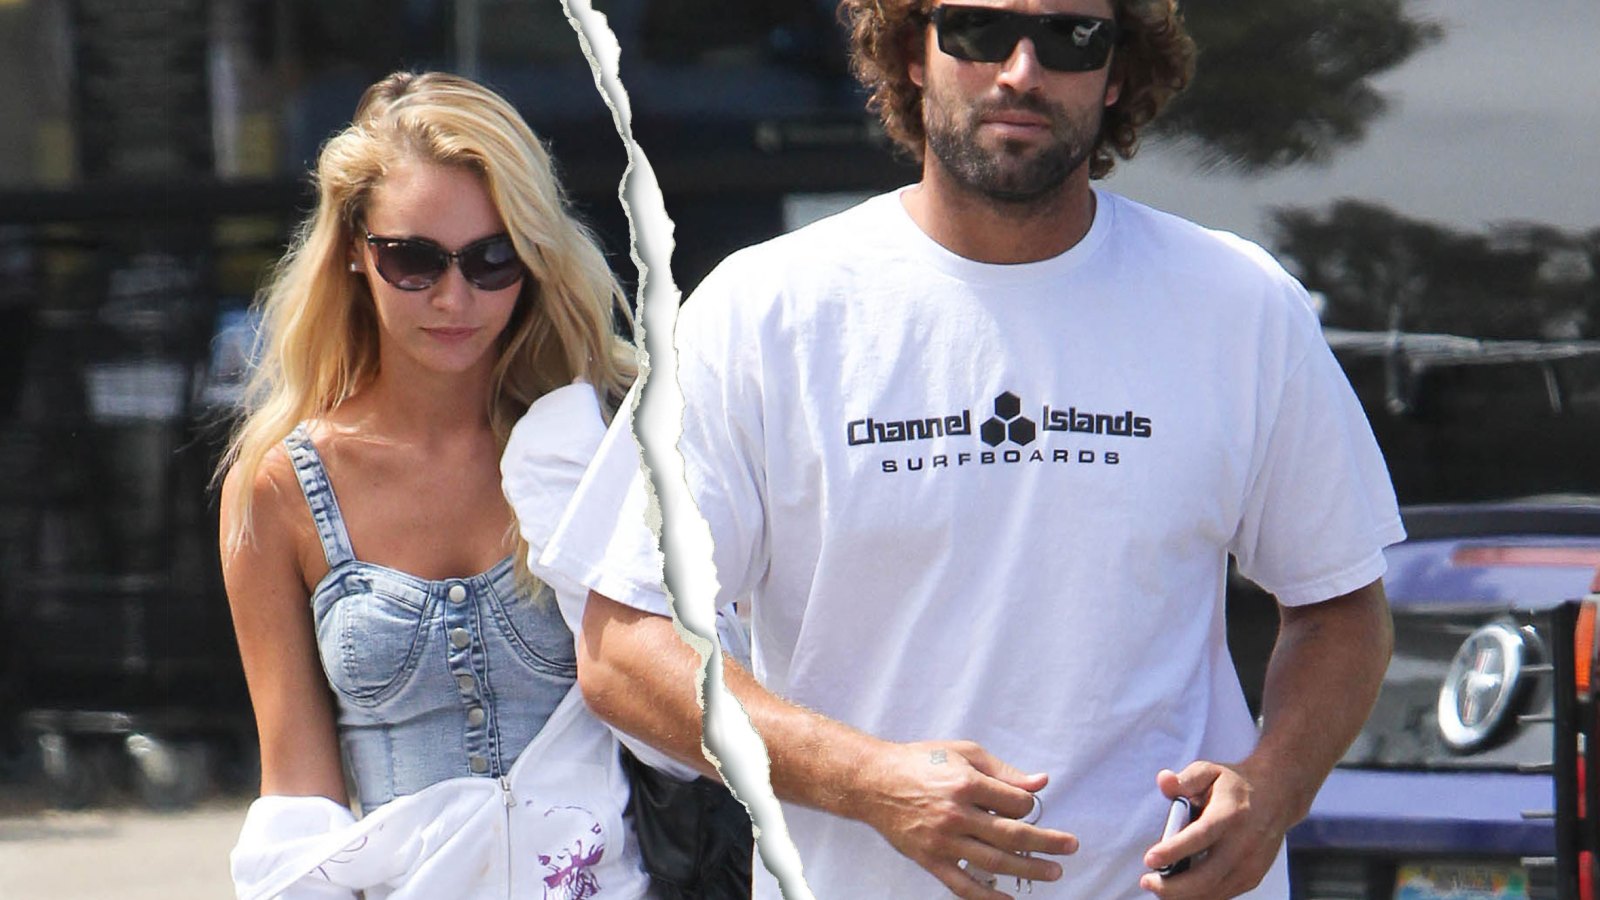 Brody Jenner and Bryana Holly